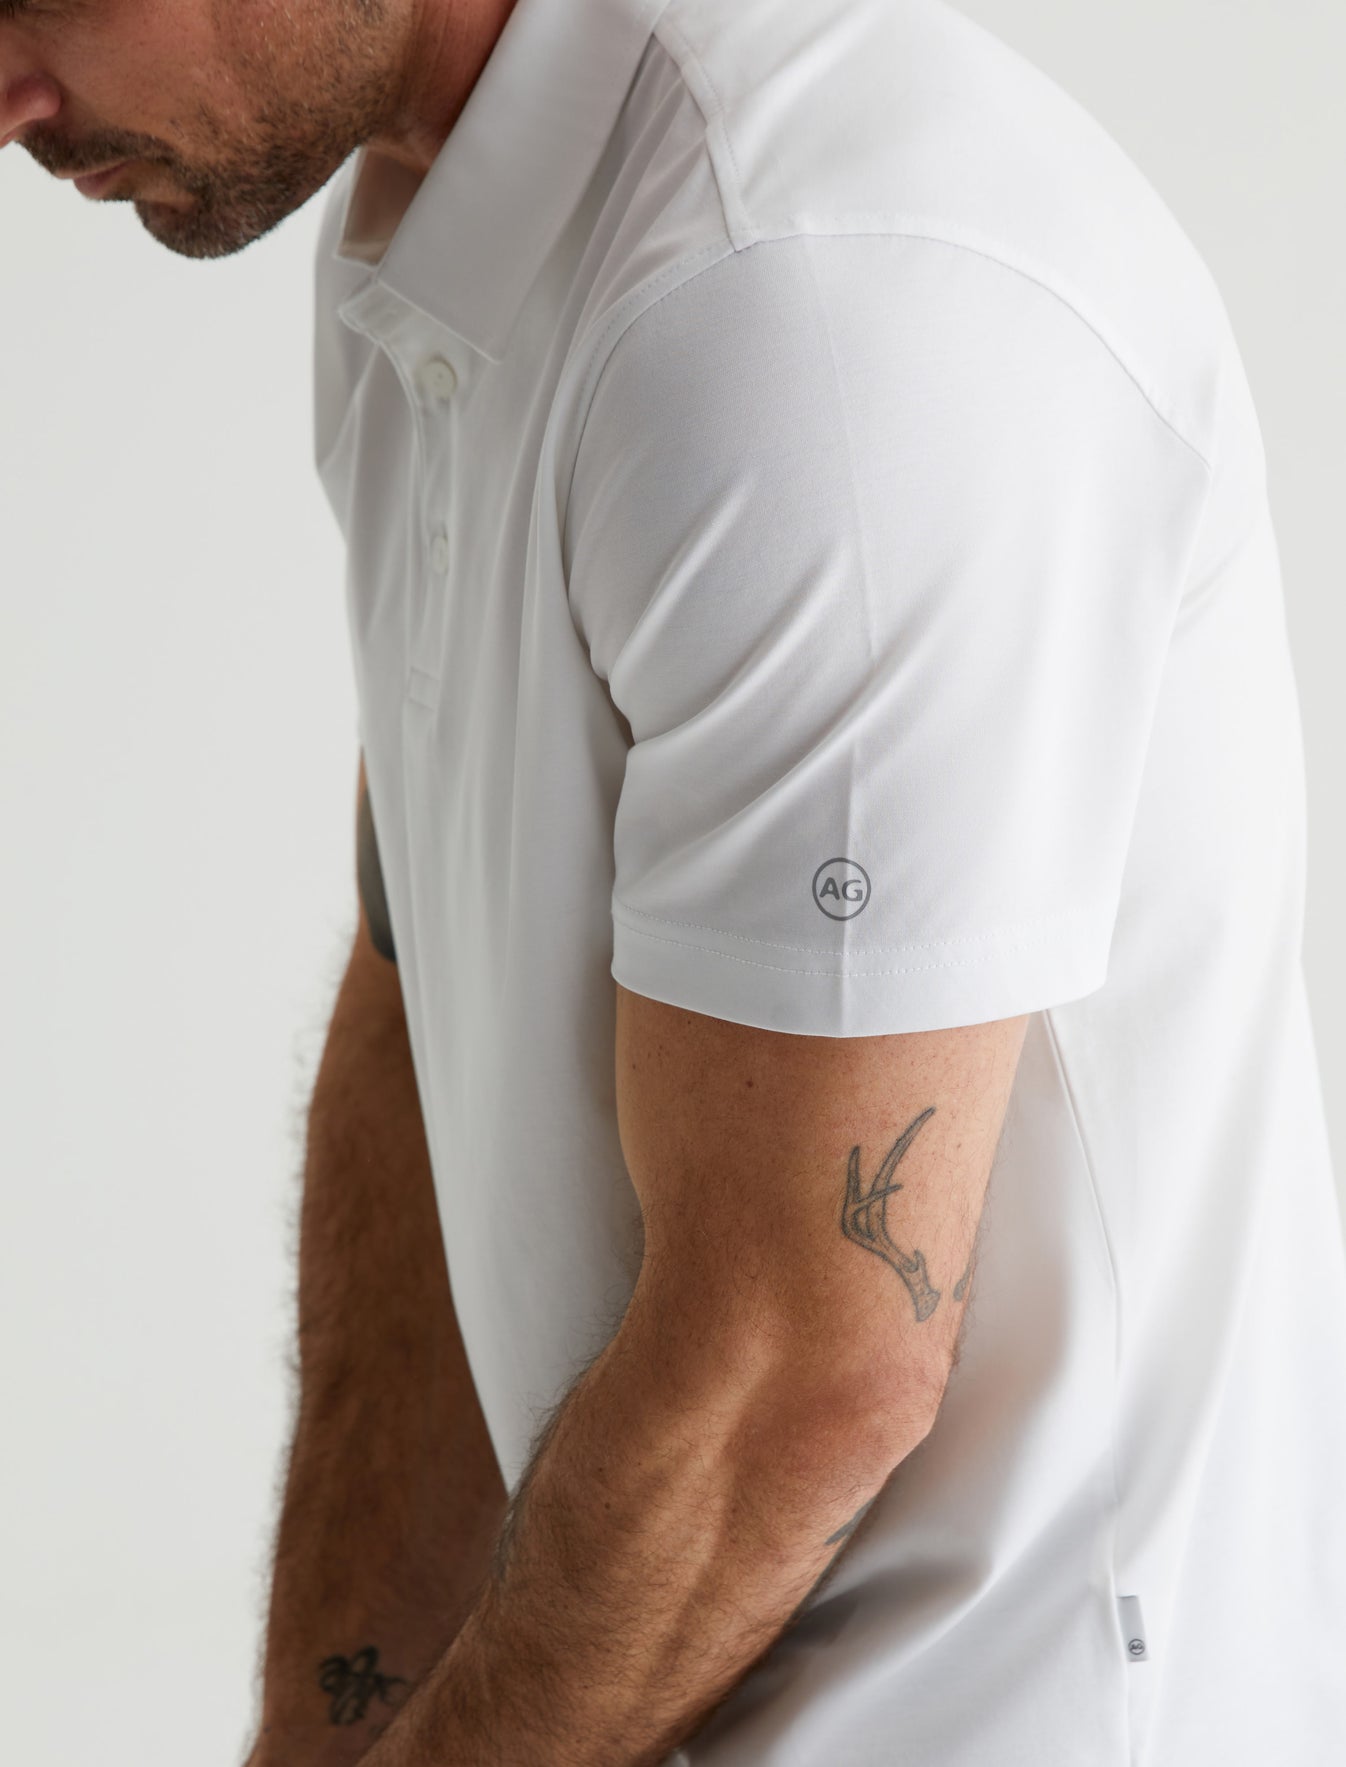 Ace S/S Polo True White Classic Fit Short Sleeve Polo T-Shirt Men Top Photo 5